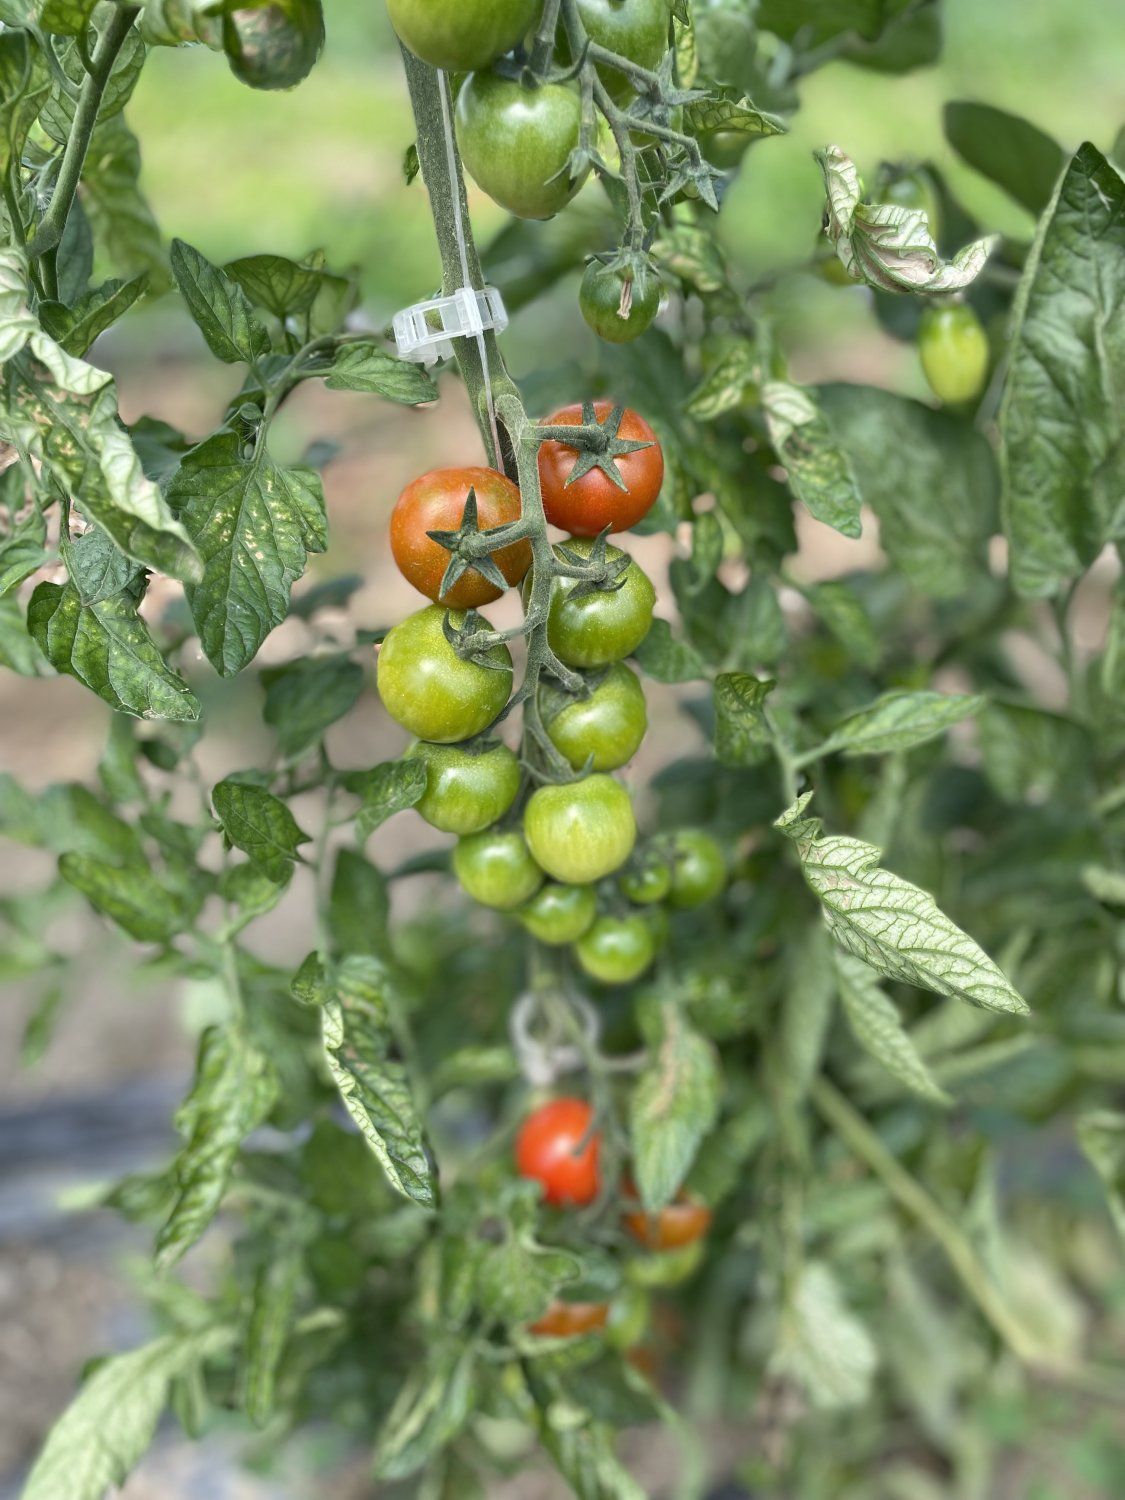 Next Happening: Tomatoes! and a note from YOUR Farmer Joseph Fox!